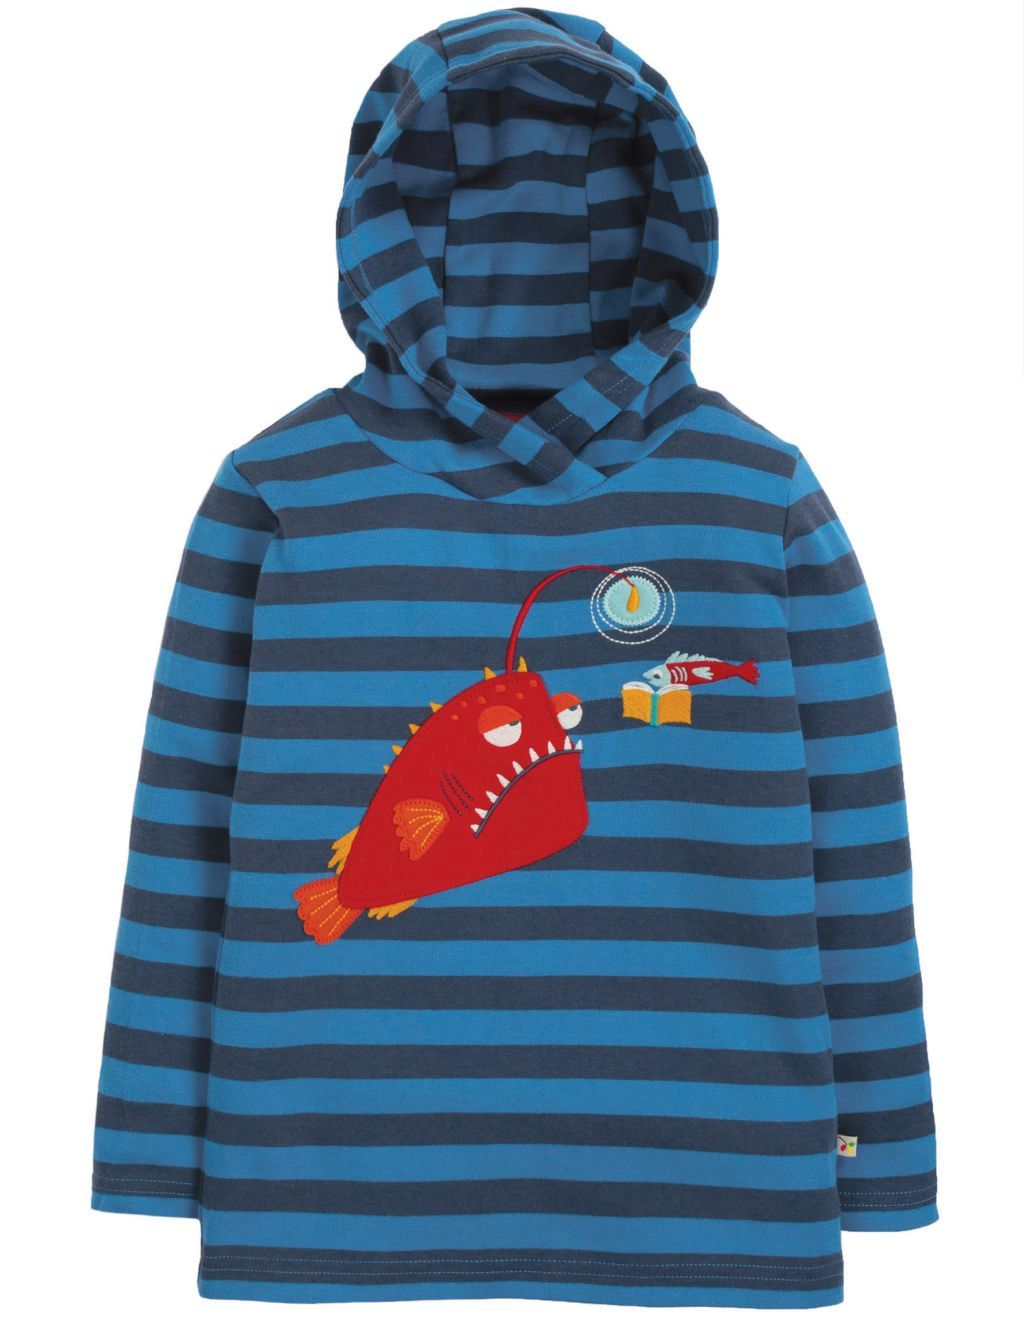 Campfire Hooded Top sail blue stripe/Angler Fish 122/128